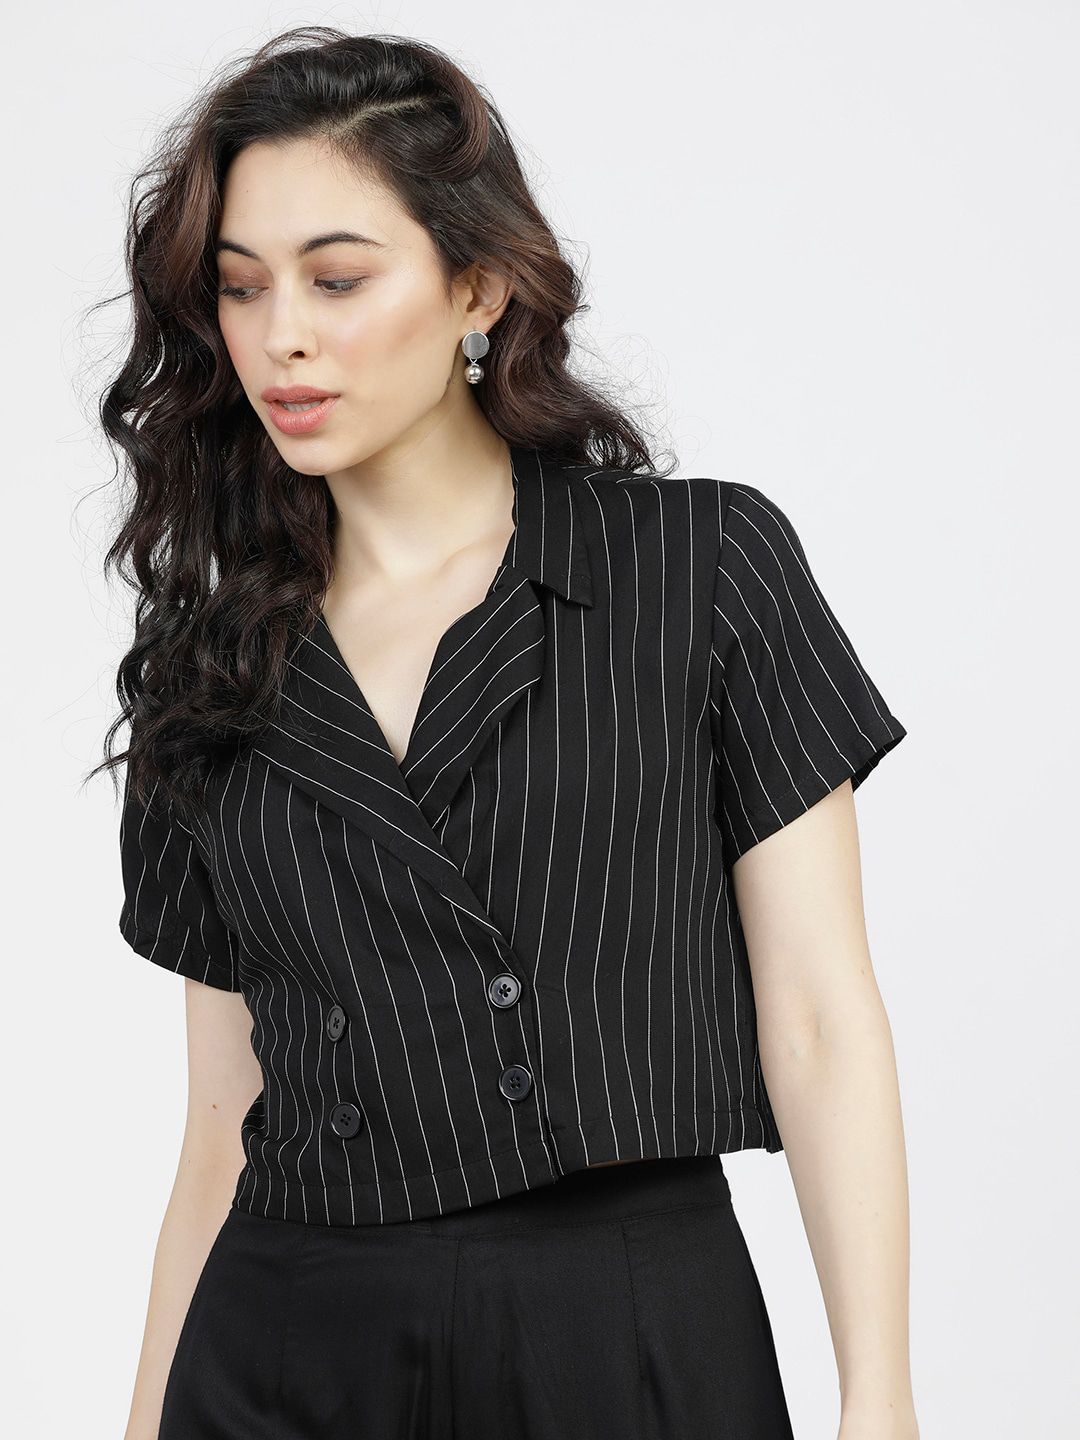 Tokyo Talkies Black Striped Shirt Style Top Price in India